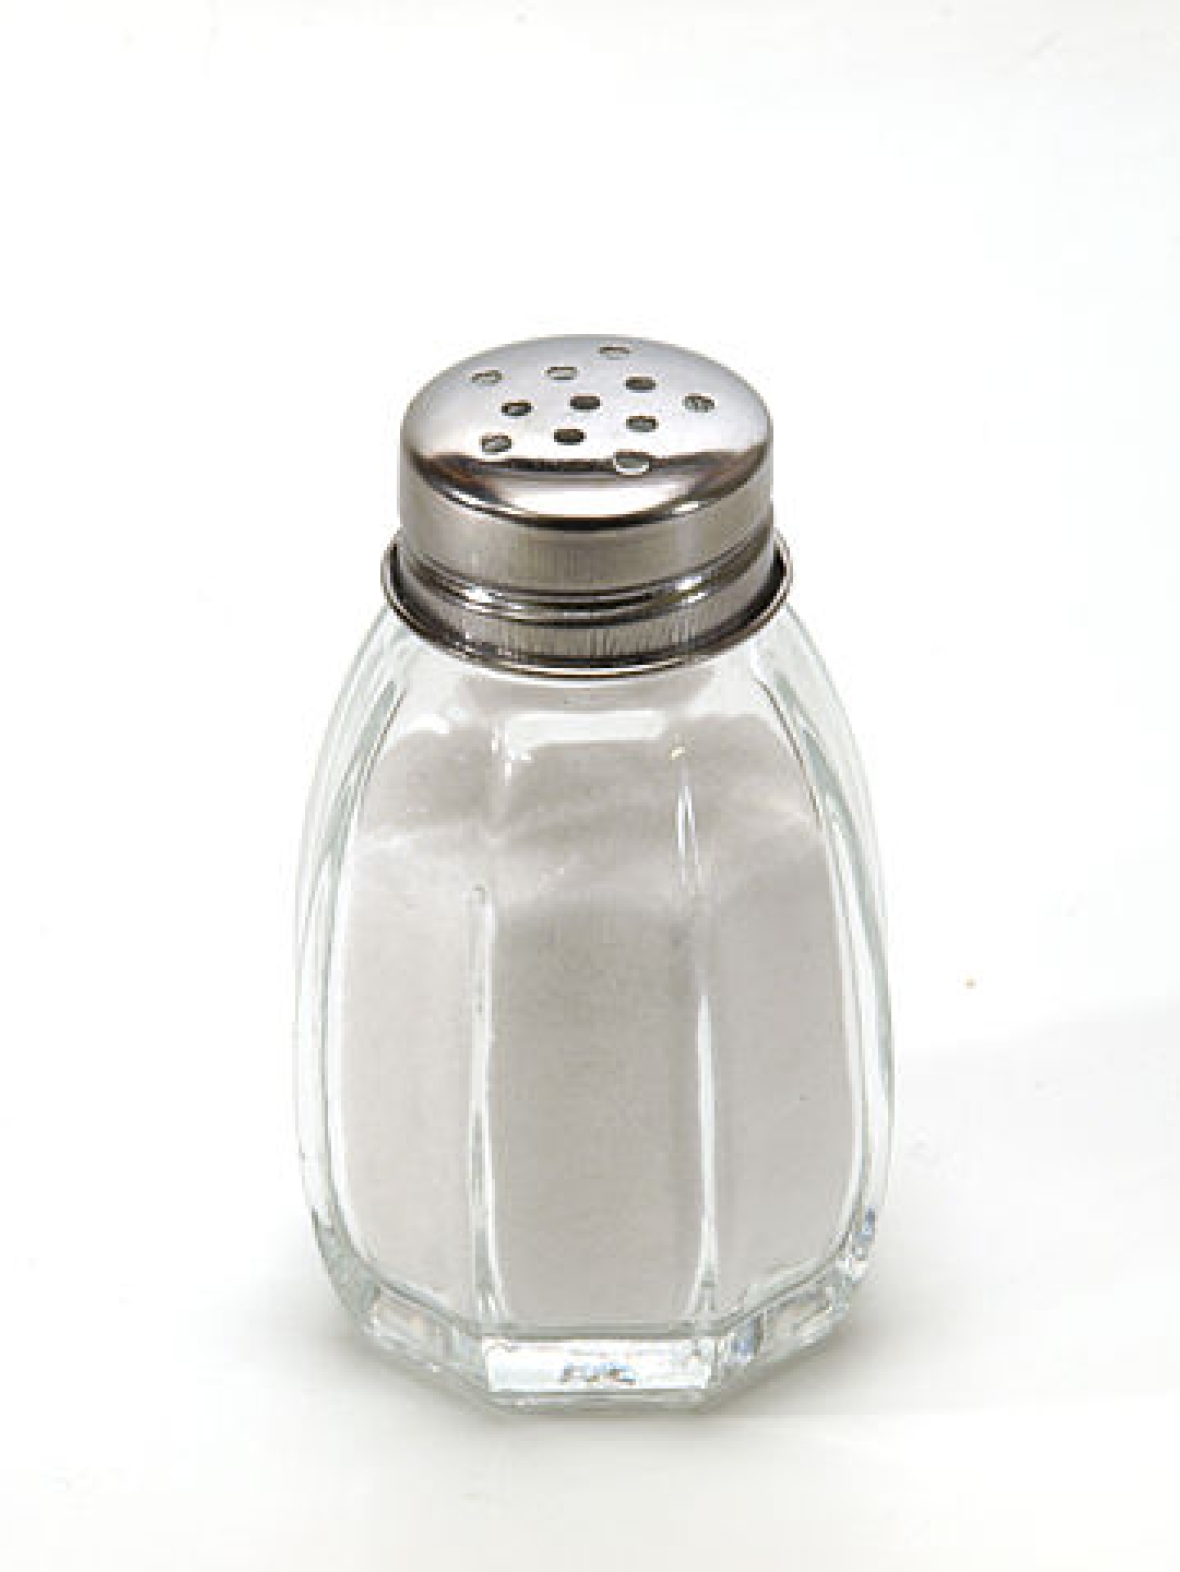 Urge the FDA to Release Sodium-reduction Targets for Industry